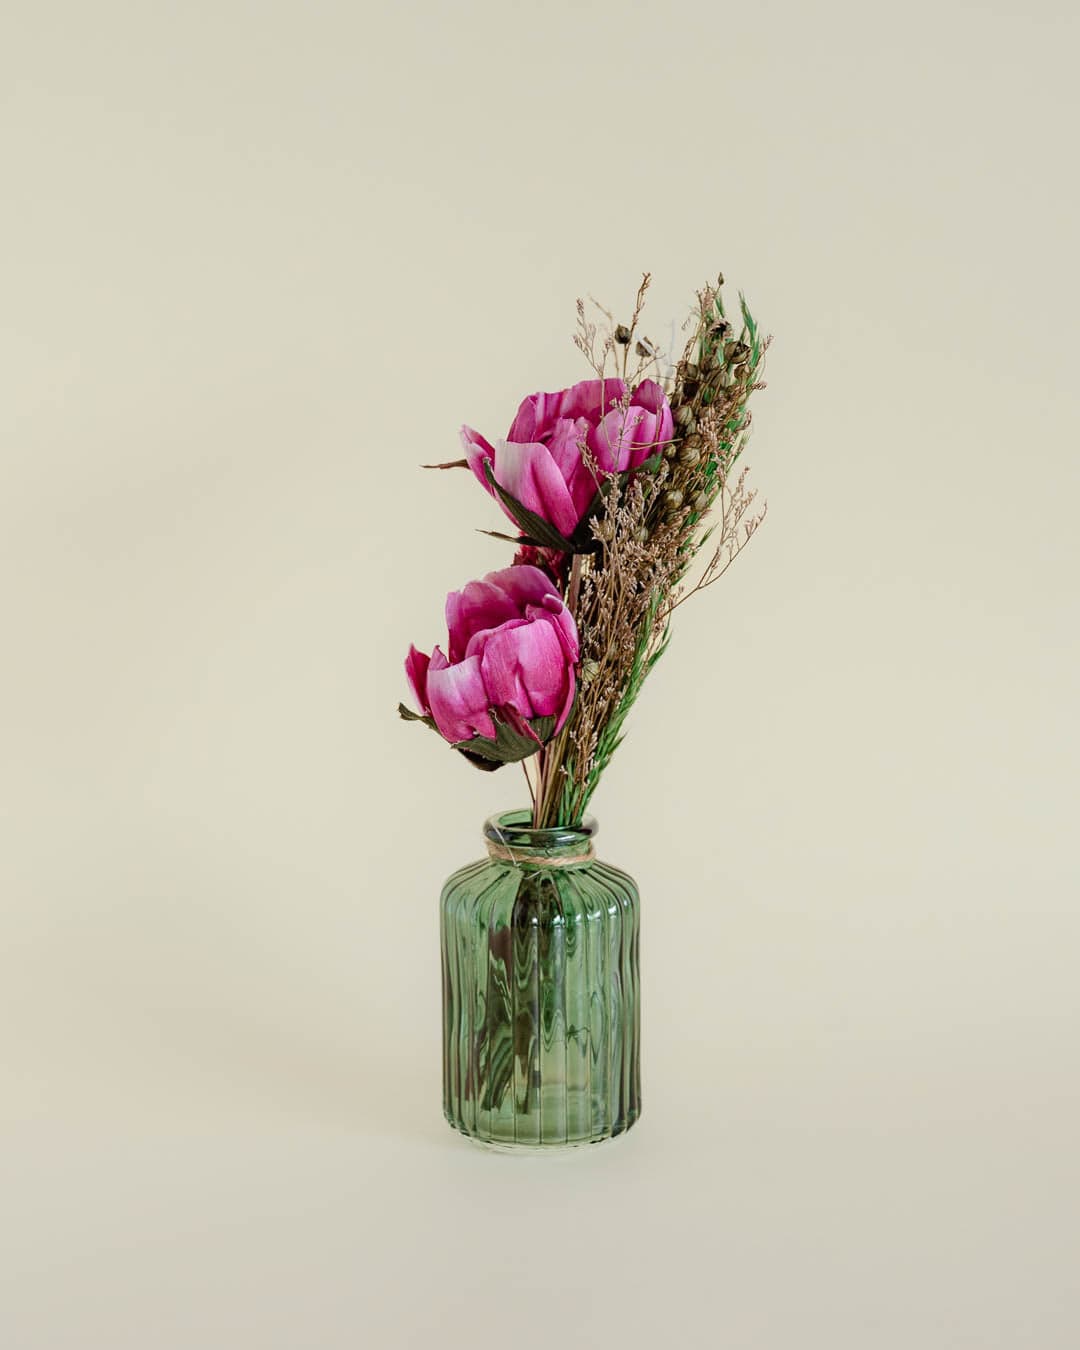 Blooms - Dried Flowers Bouqet in Glass Vase